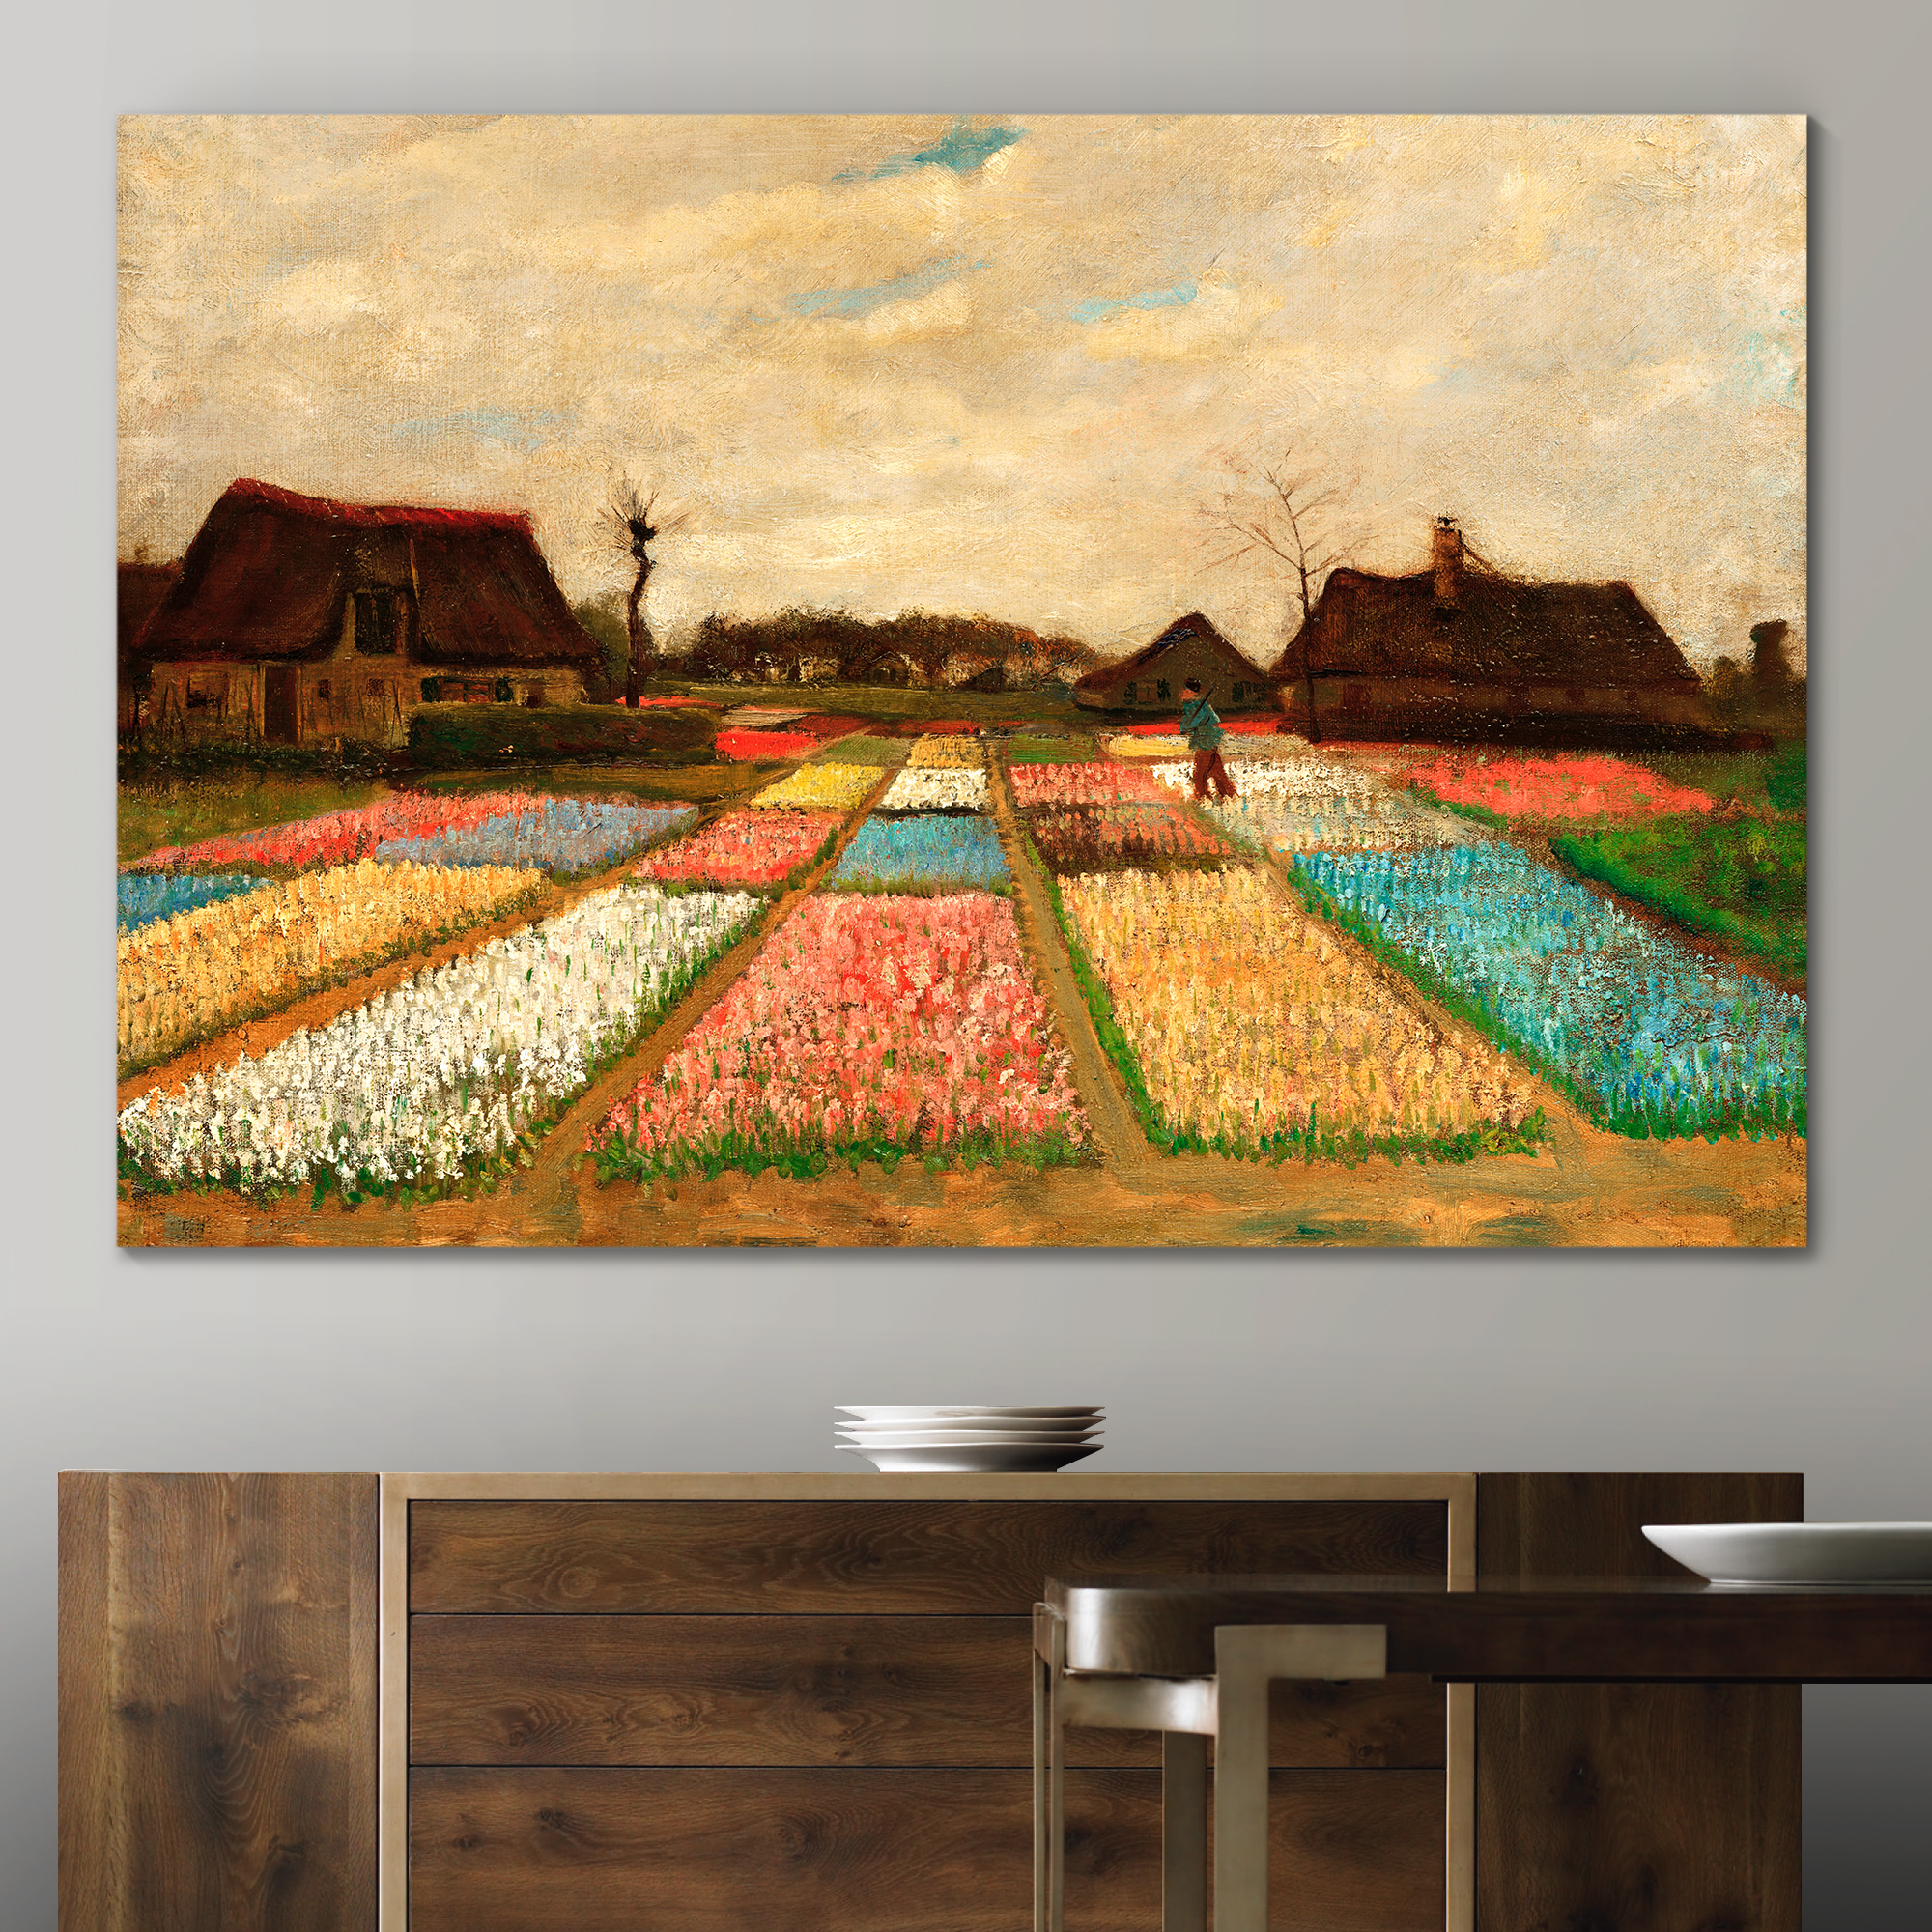 Bulb Fields (Also Called Flower Beds in Holland) by Vincent Van Gogh - Oil Painting Reproduction on Canvas Prints Wall Art, Ready to Hang - 32